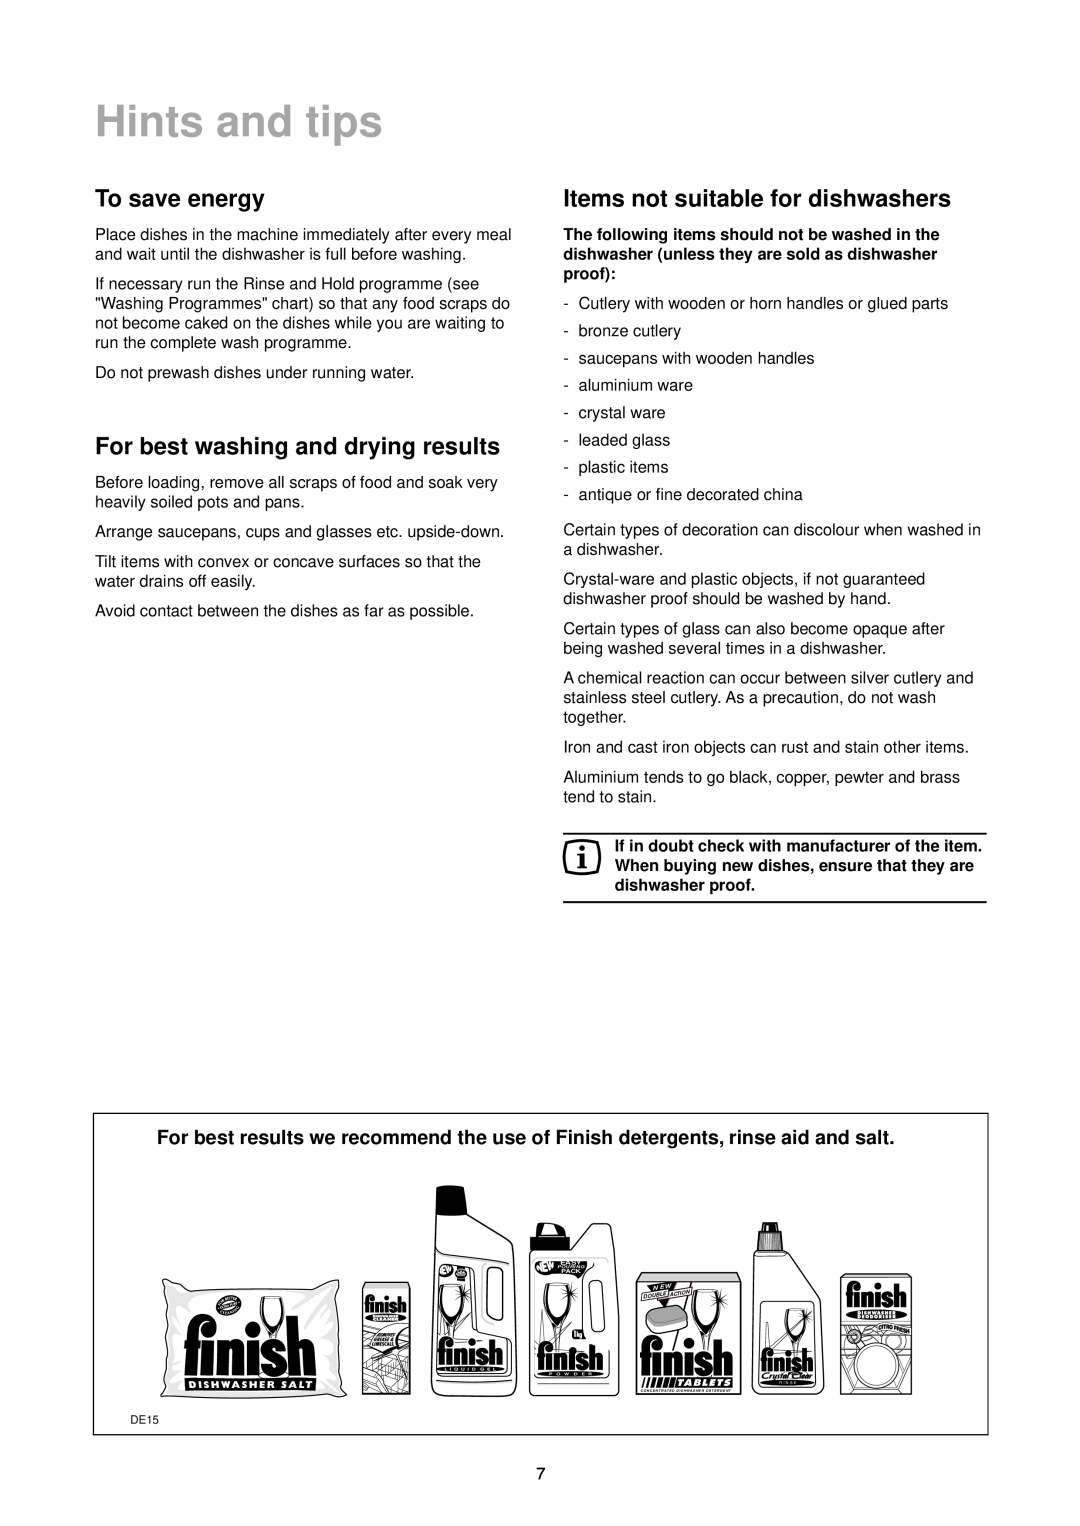 Zanussi DA 6141 Hints and tips, To save energy, For best washing and drying results, Items not suitable for dishwashers 